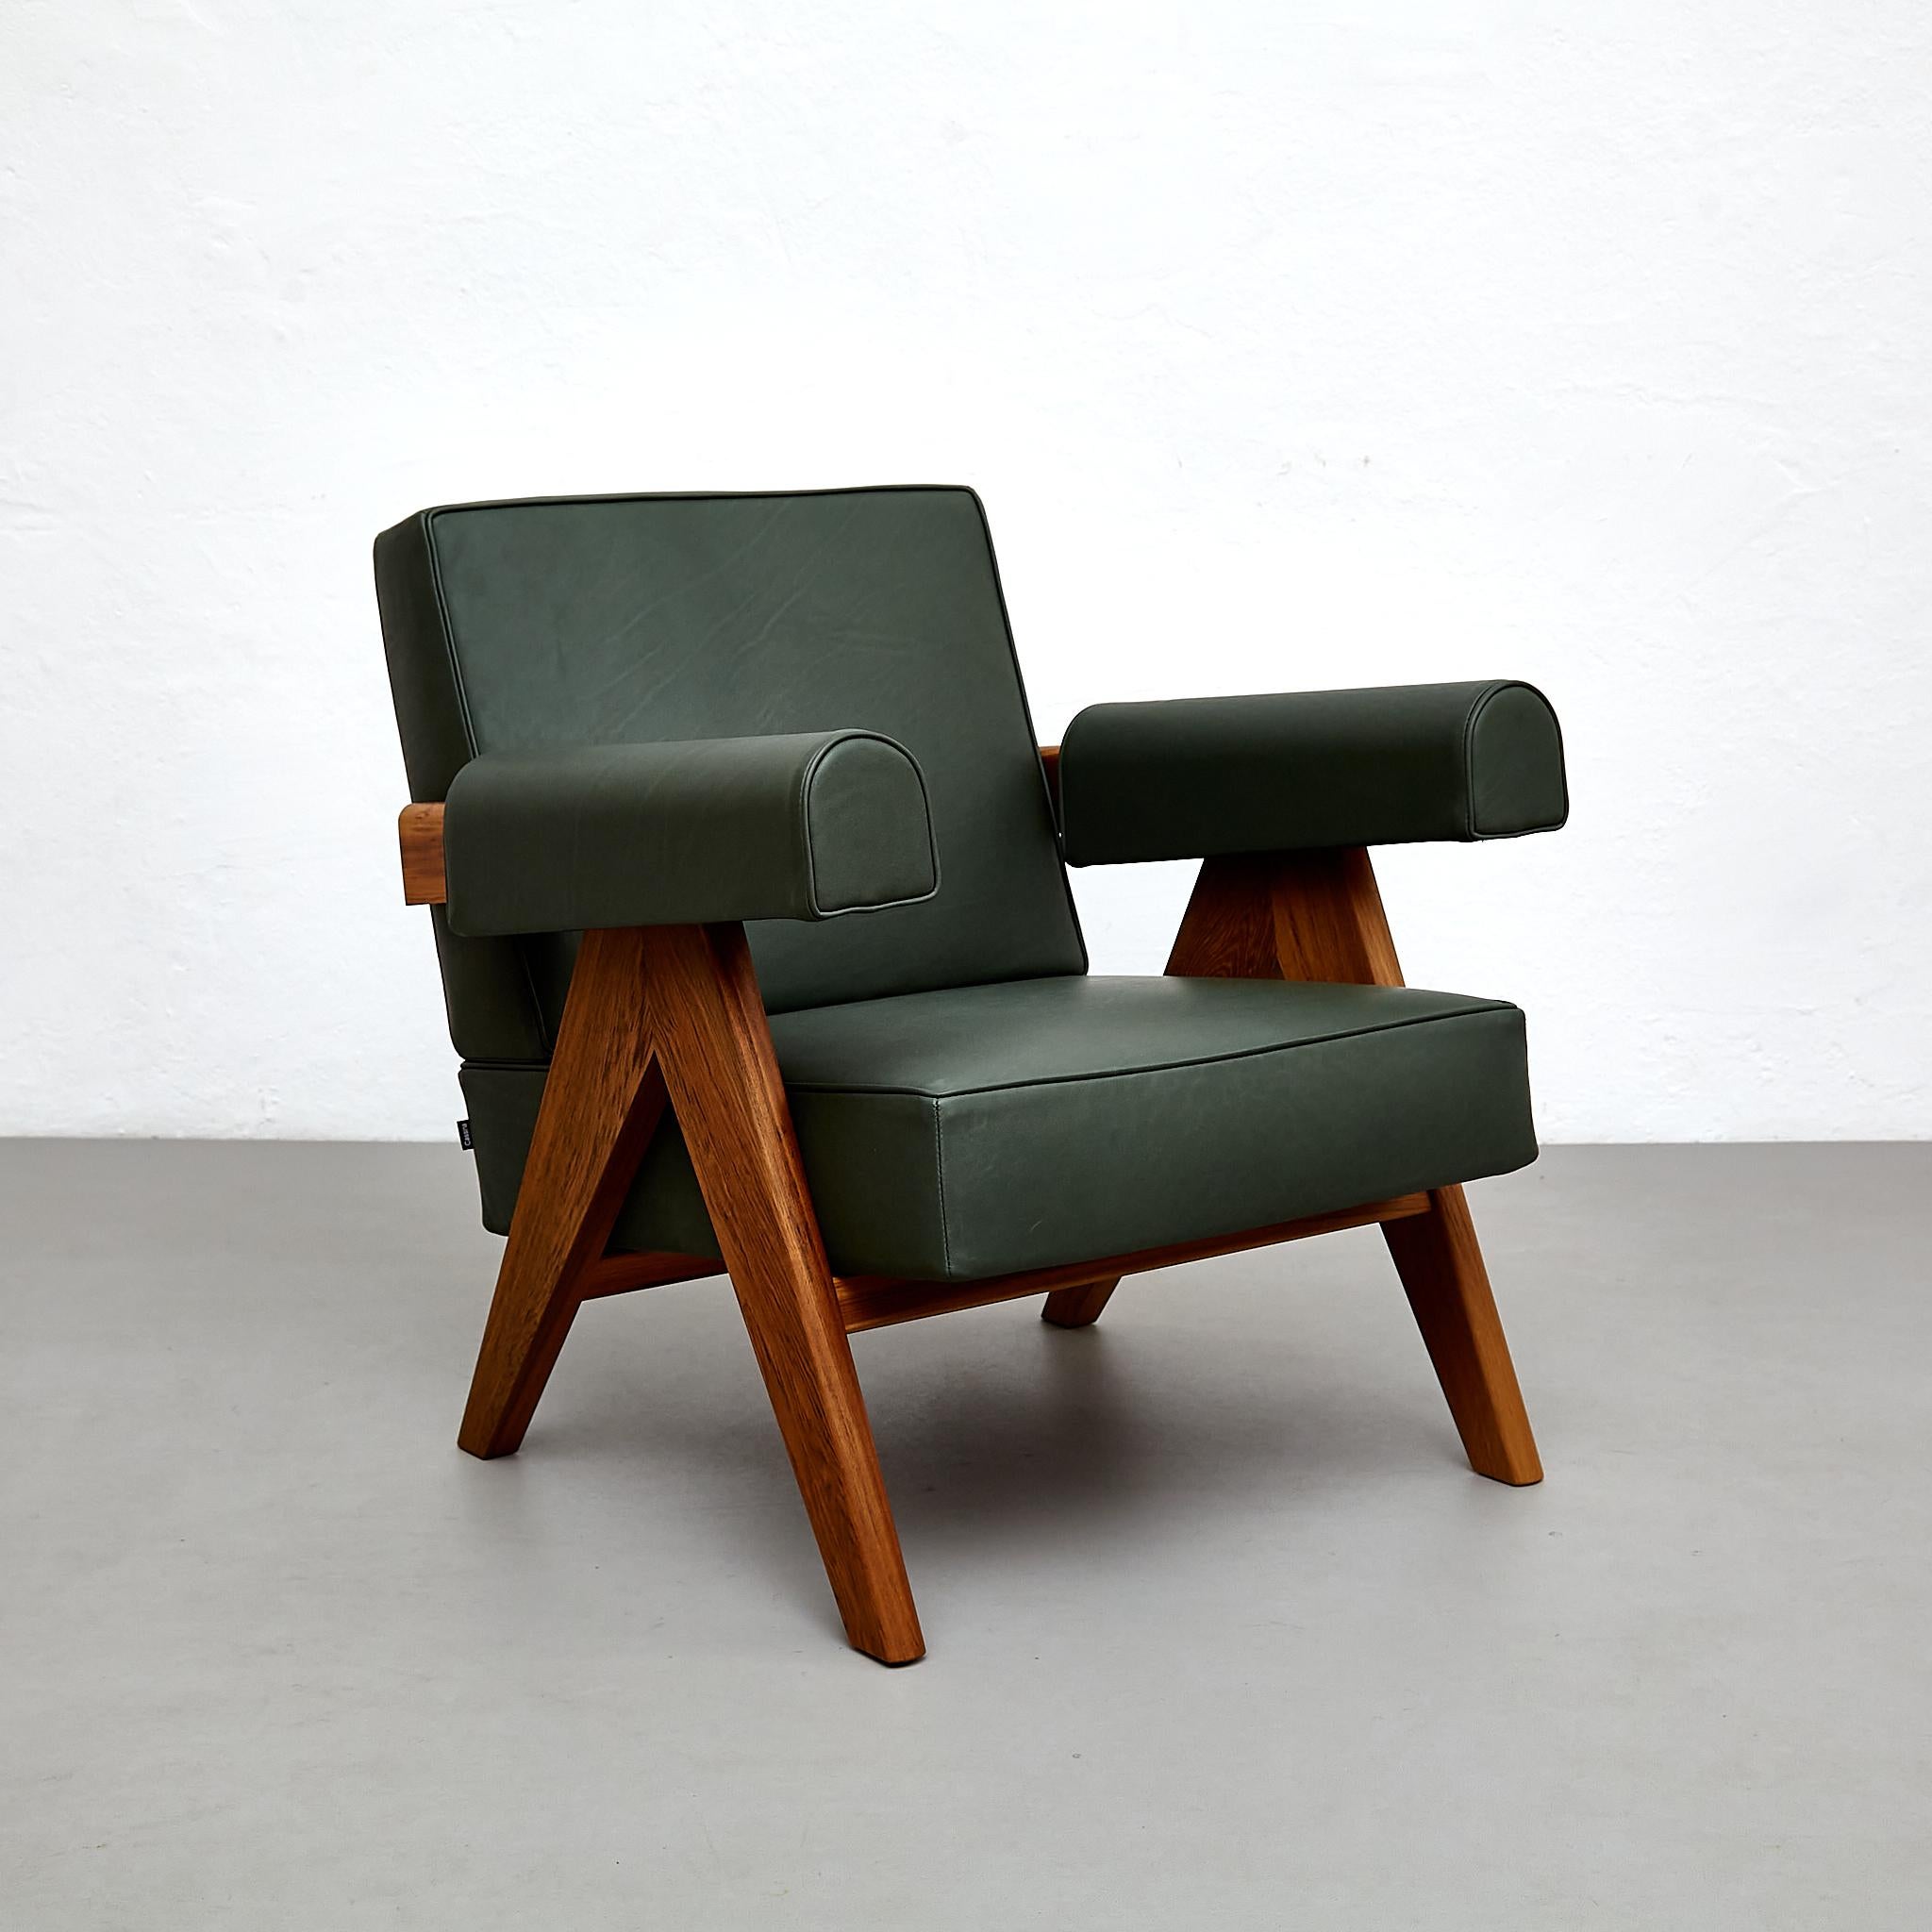 Experience timeless elegance and exceptional craftsmanship with the Pierre Jeanneret Armchair, originally designed circa 1950 and relaunched in 2019. Manufactured by Cassina in Italy, this iconic piece showcases a harmonious blend of teak wood and